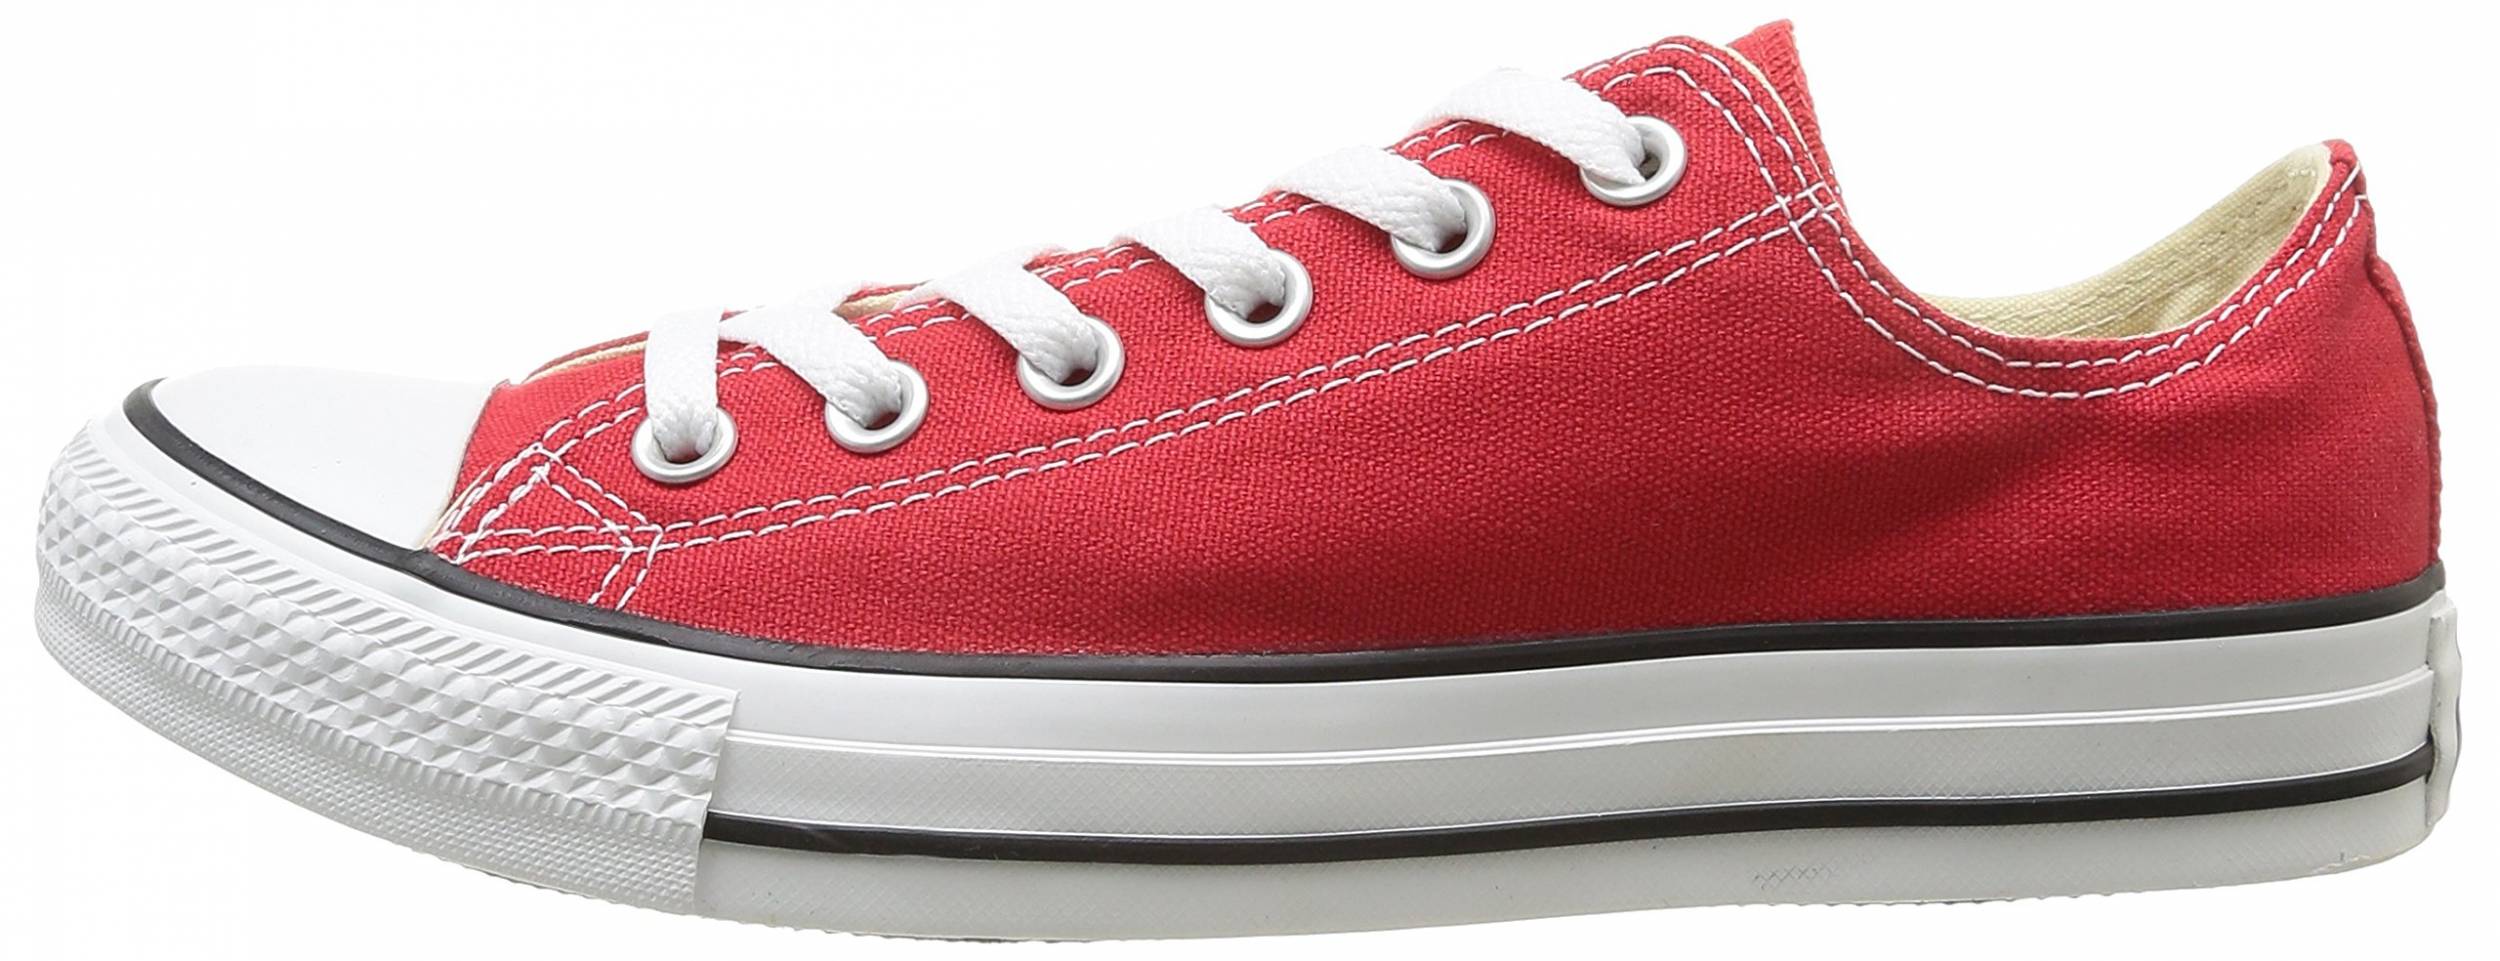 Only $33 + Review of Converse Chuck Taylor All Star Seasonal Ox | RunRepeat